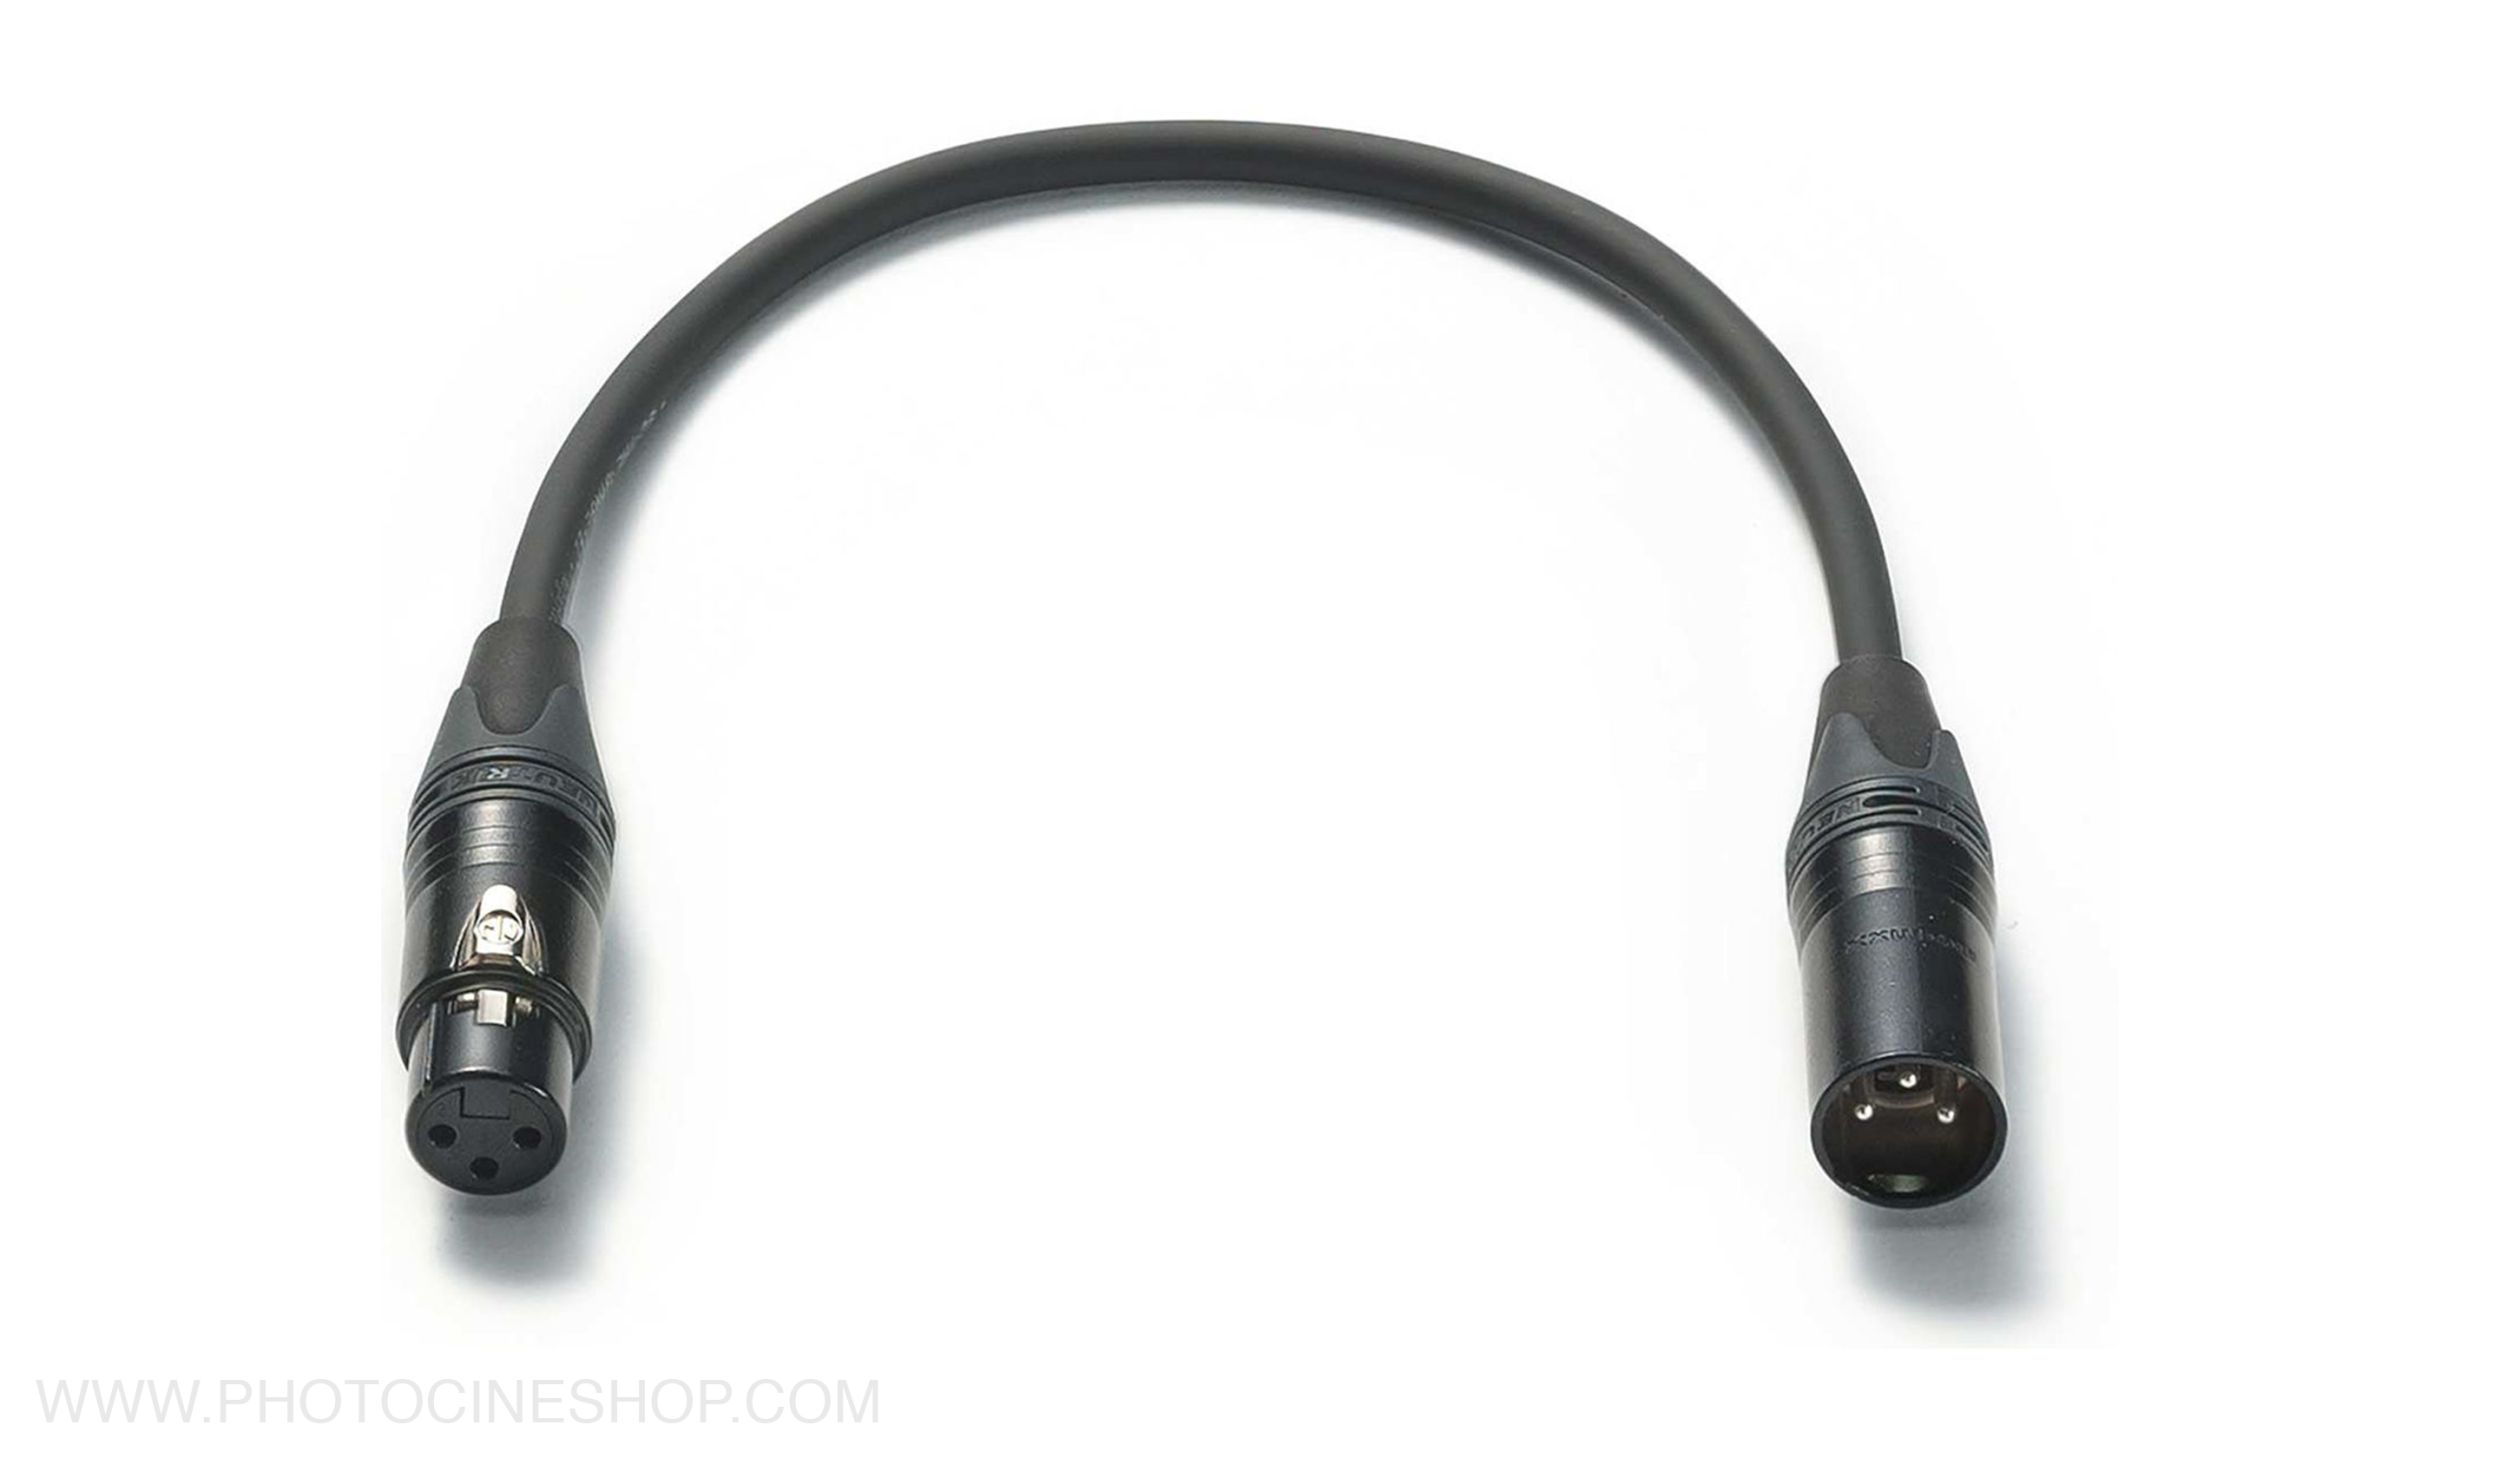 ARRI - K2.0001271 - Audio XLR Cable 3pin Male to 3pin Female Short (0.4m, 1.3 ft)